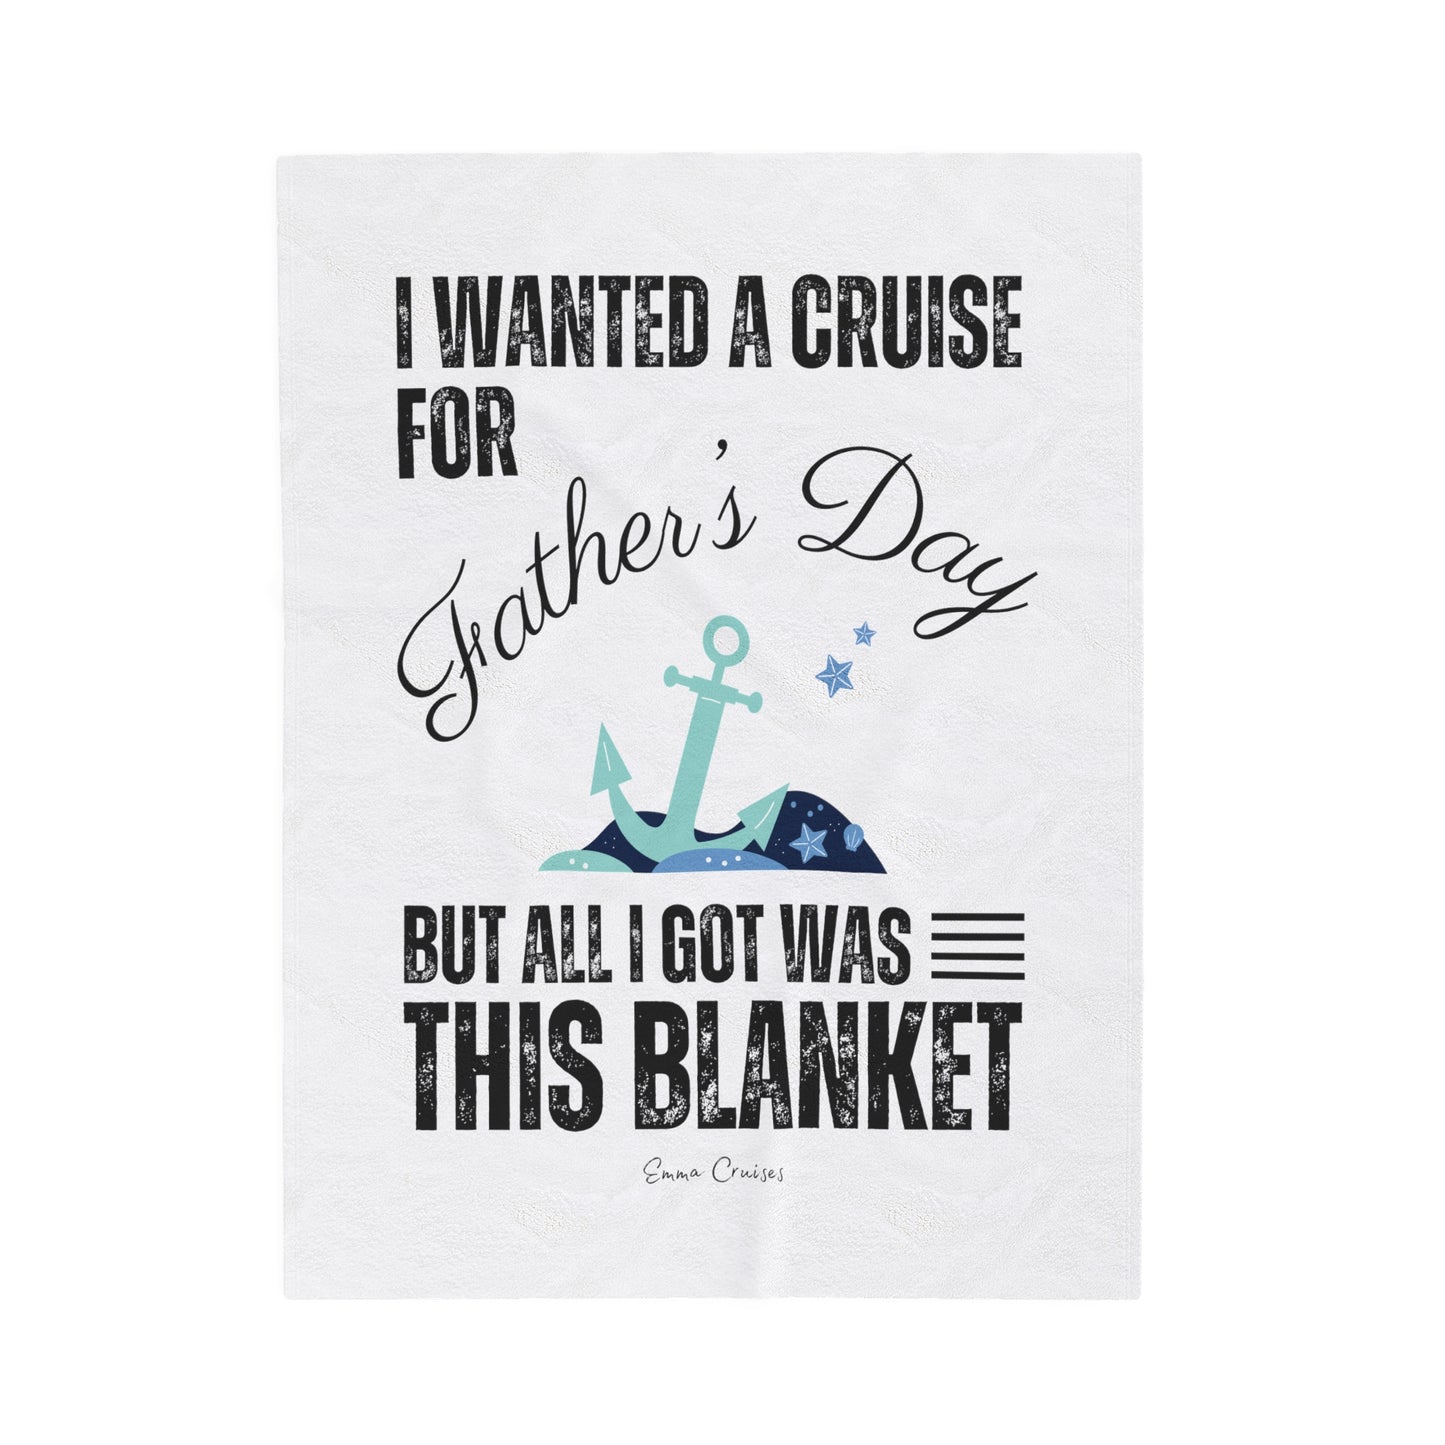 I Wanted a Cruise for Father's Day - Velveteen Plush Blanket